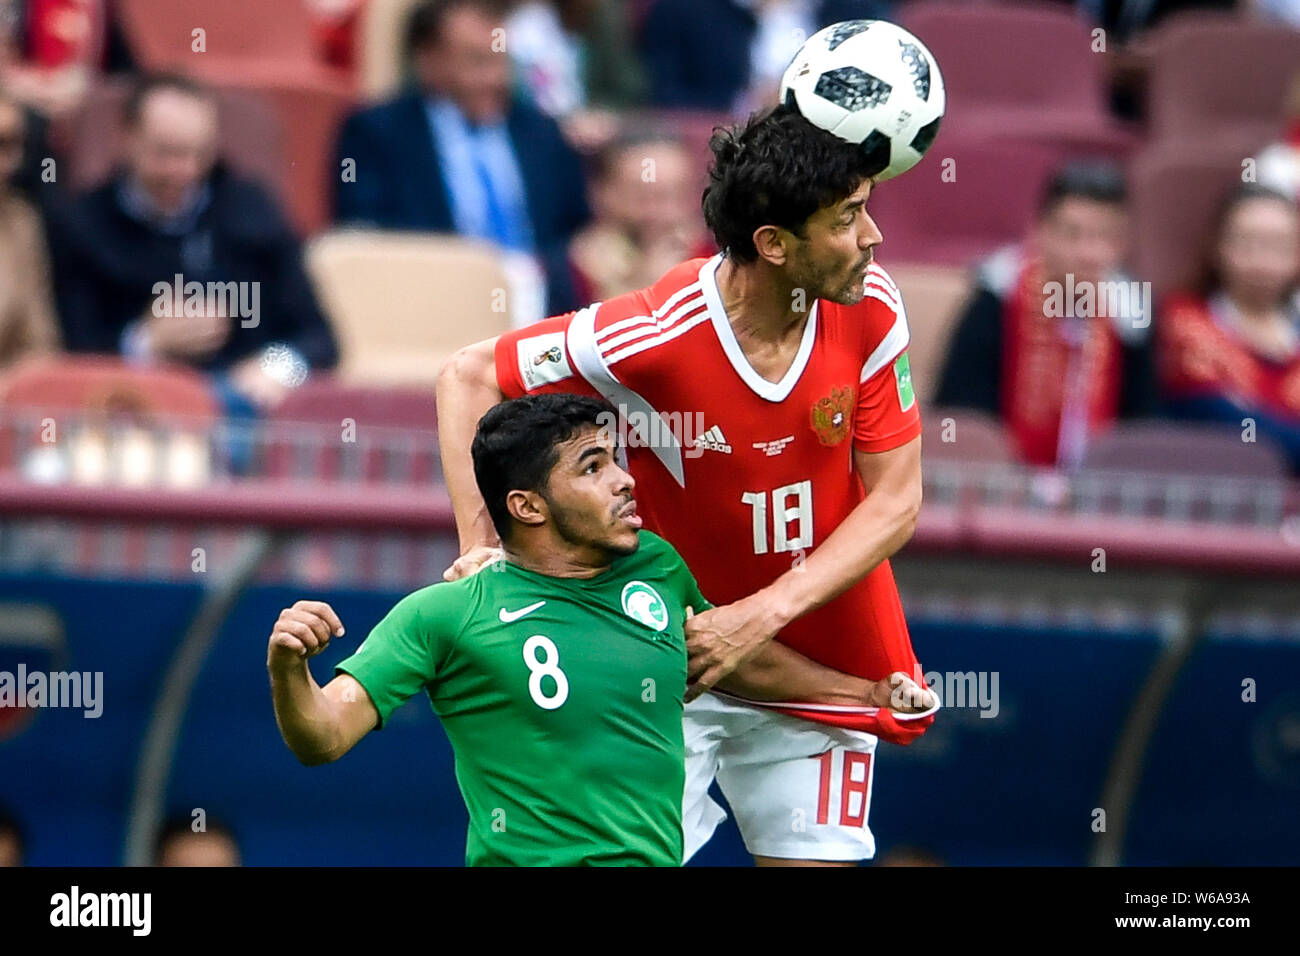 Yuri Zhirkov of Russia, right, heads the ball against Yury Gazinsky of Saudi Arabia in their Group A match during the 2018 FIFA World Cup in Moscow, R Stock Photo